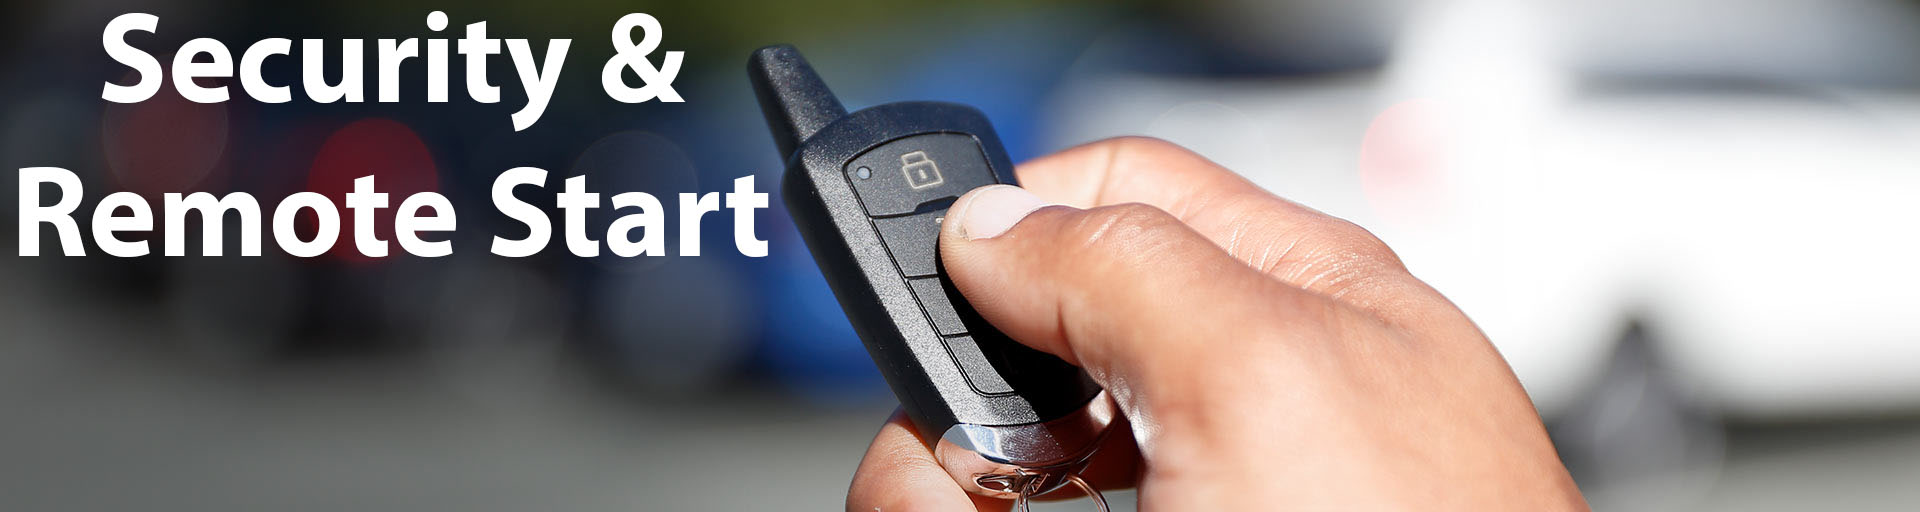 Security & Remote Start